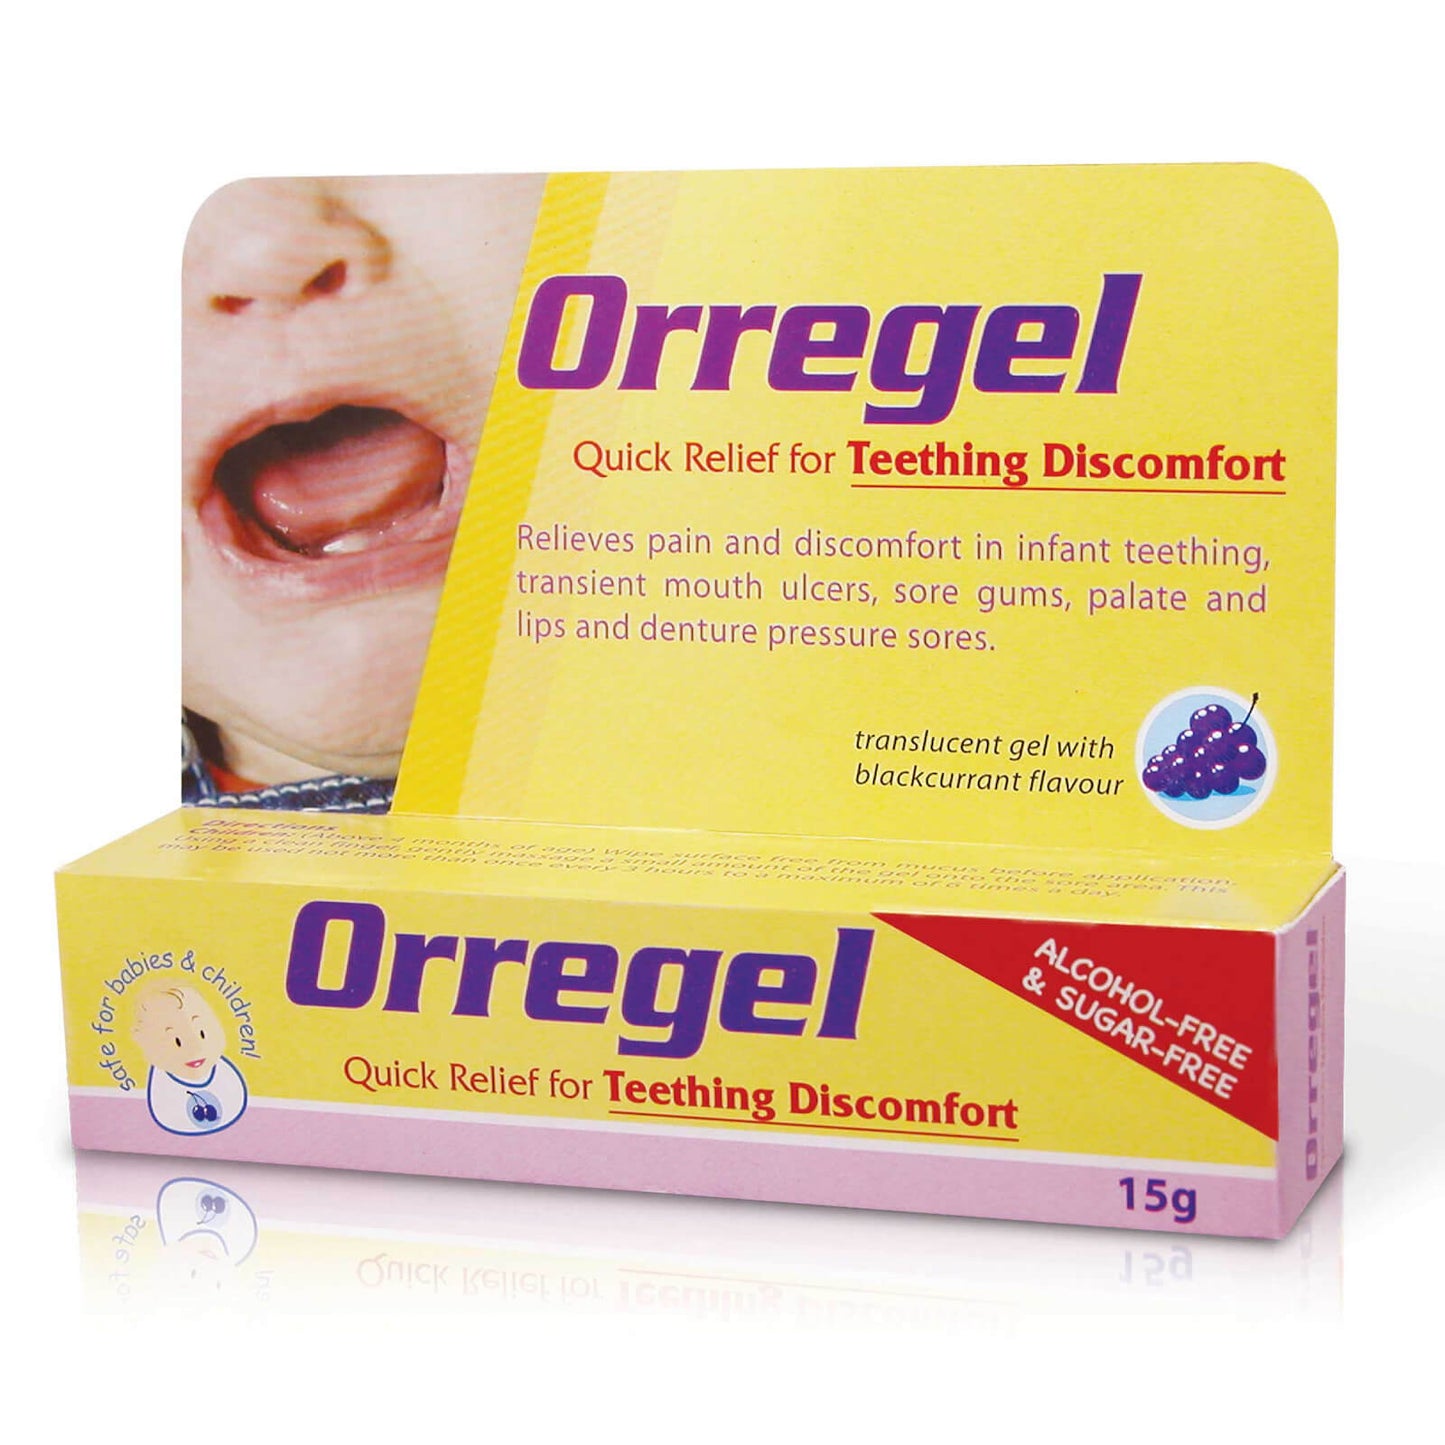 Orregel Relief for Teething Discomfort 15g (Blackcurrant Flavour)